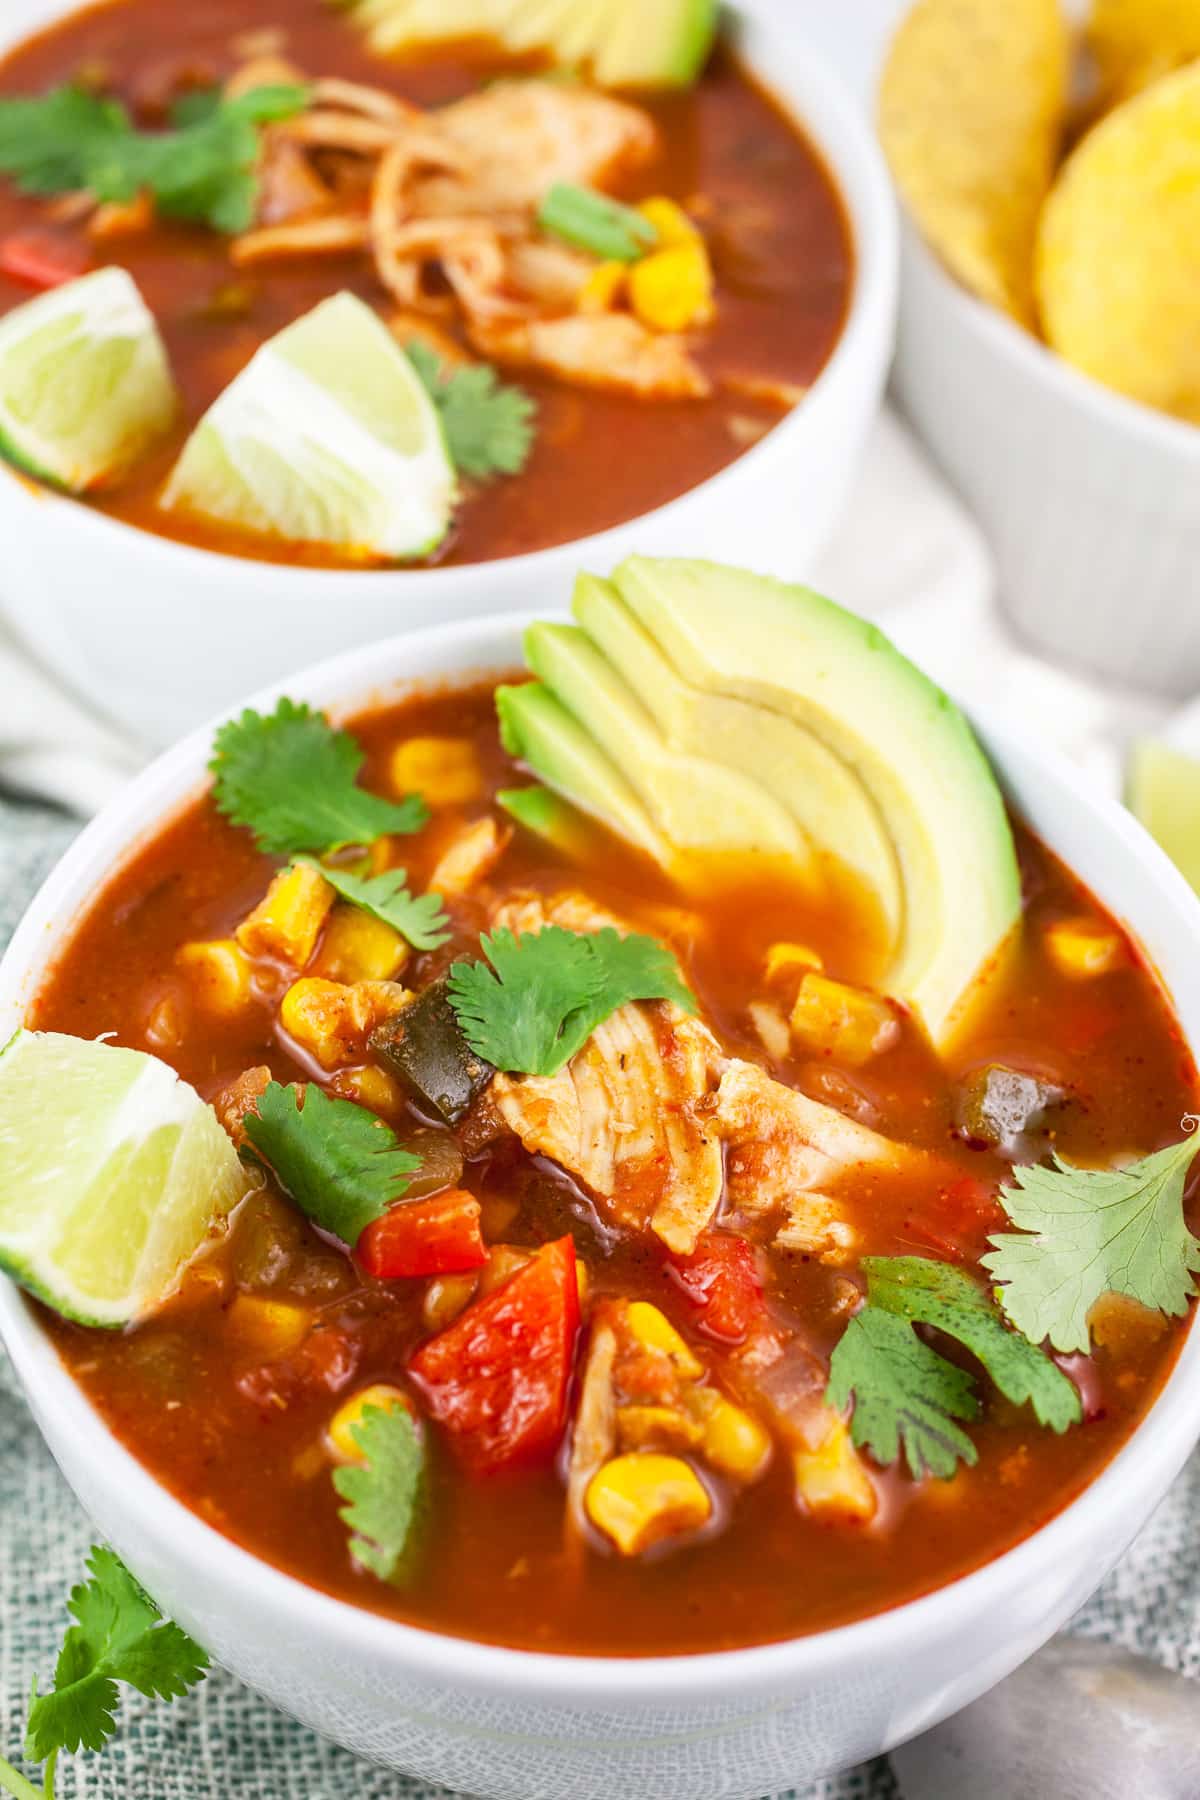 Chicken corn soup in white bowls with sliced avocado, cilantro, and lime wedges.